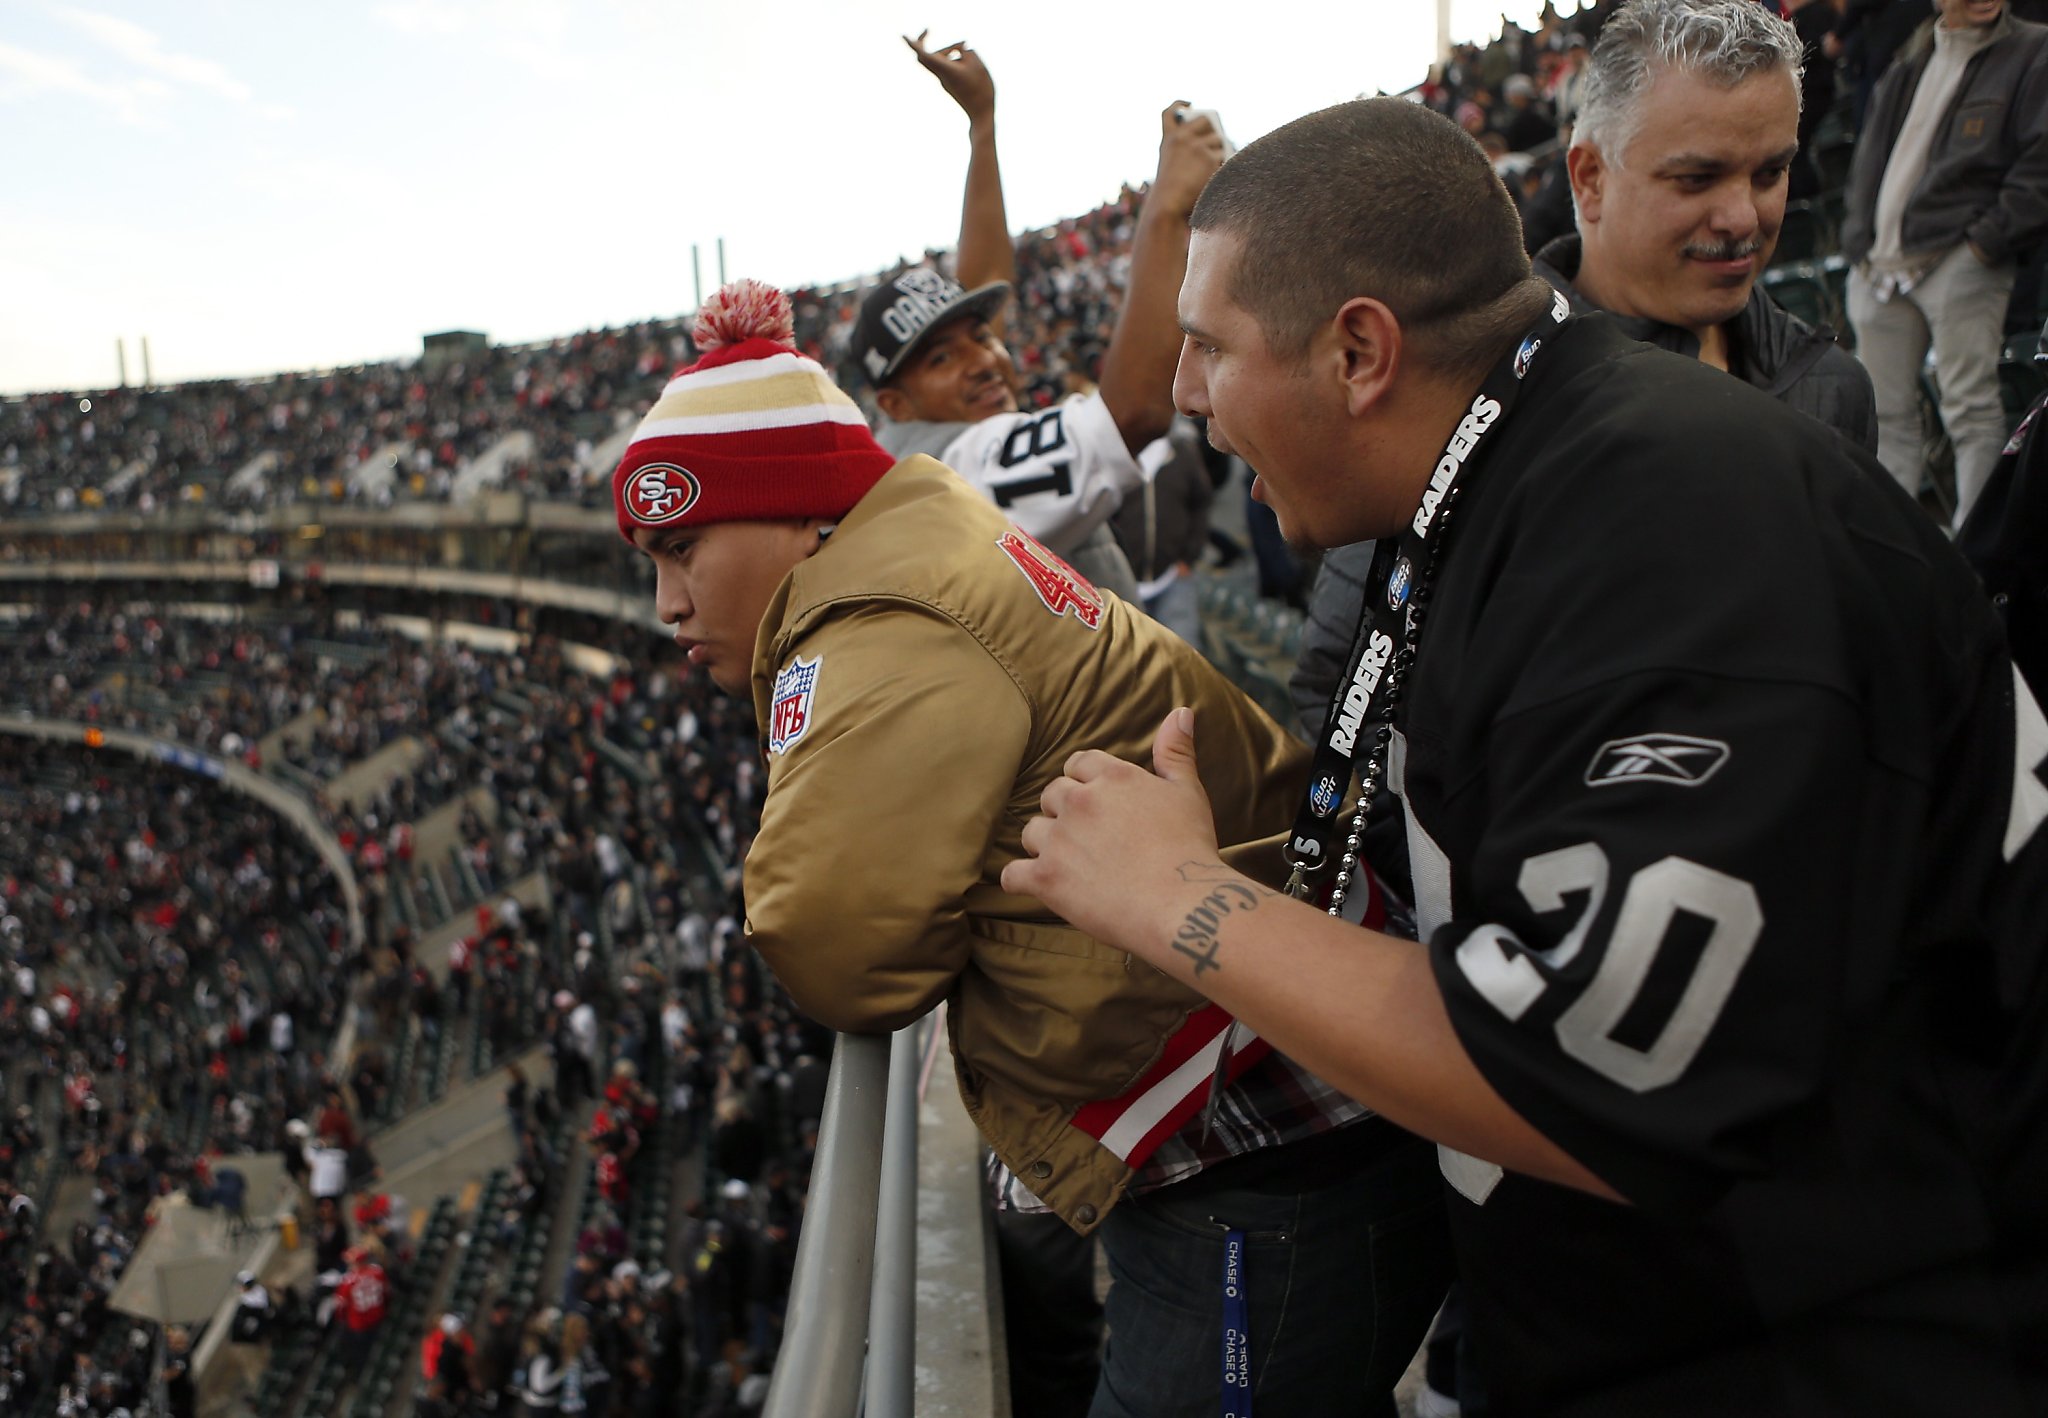 Raiders, Niners fans mellowed by mutual love of football, food - SFGate2048 x 1418